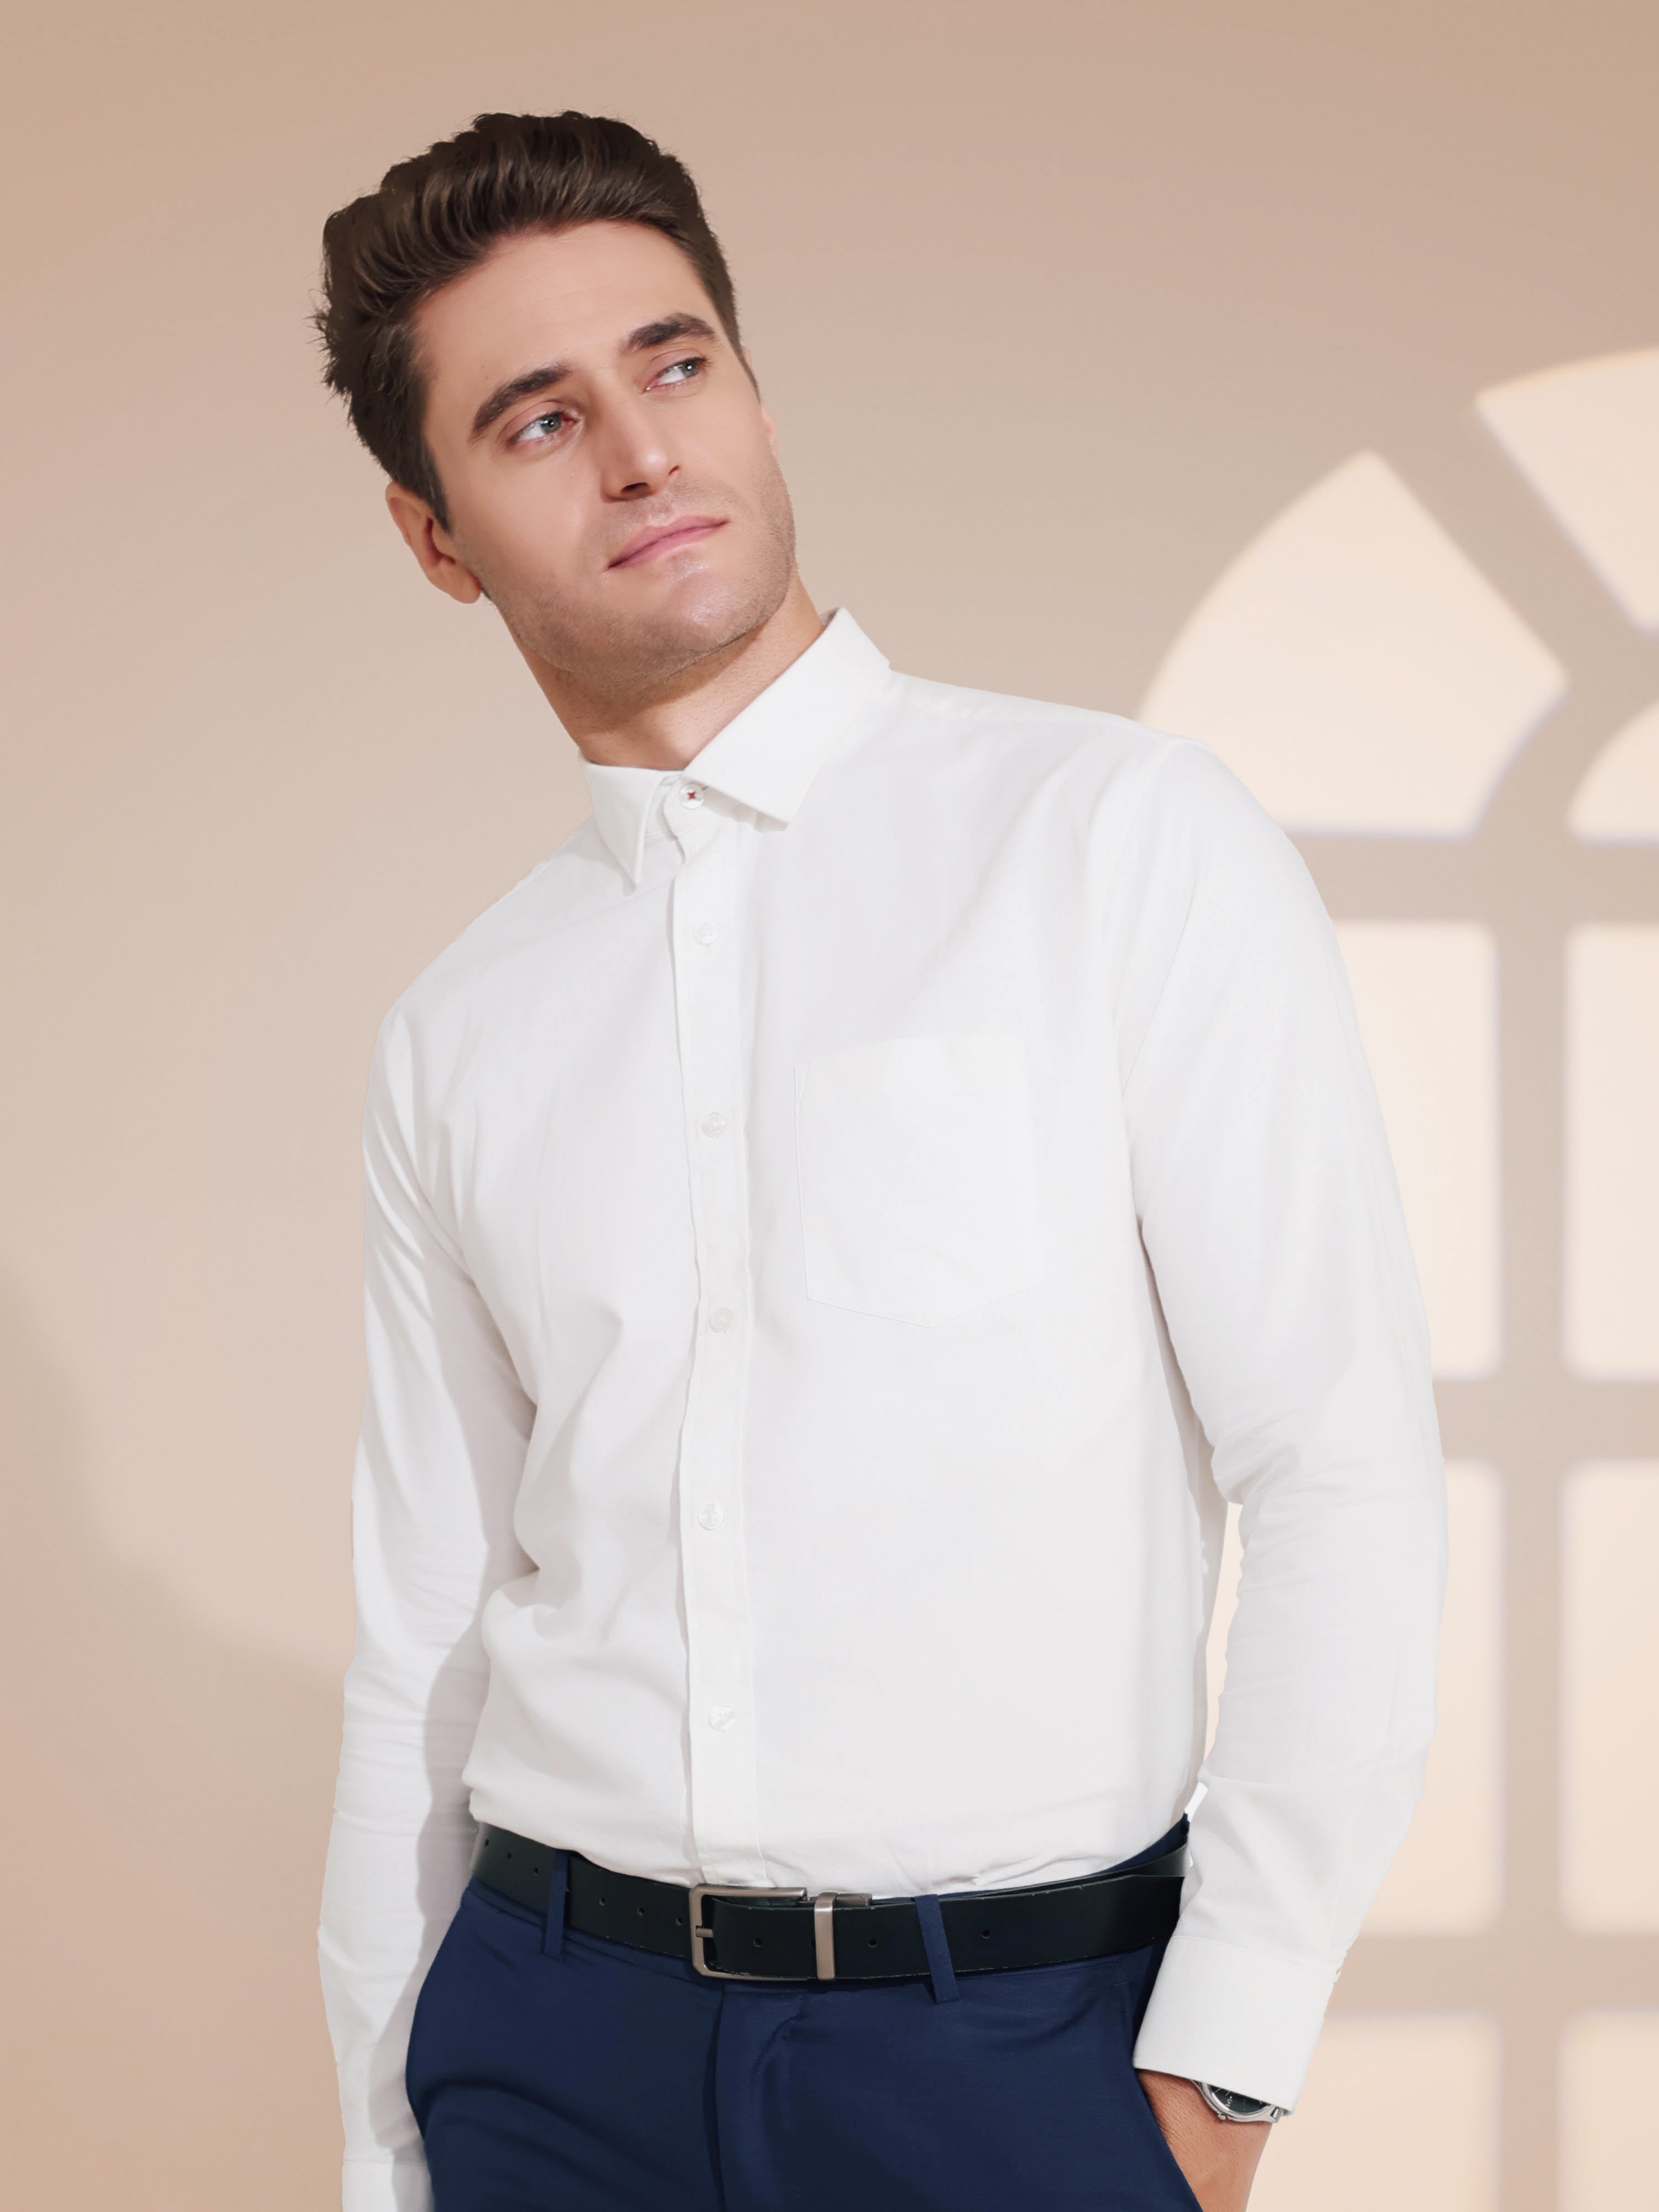 Man wearing Moonlite White Oxford Turms shirt, stylish premium cotton white shirt for men, perfect for casual wear and menswear trends.